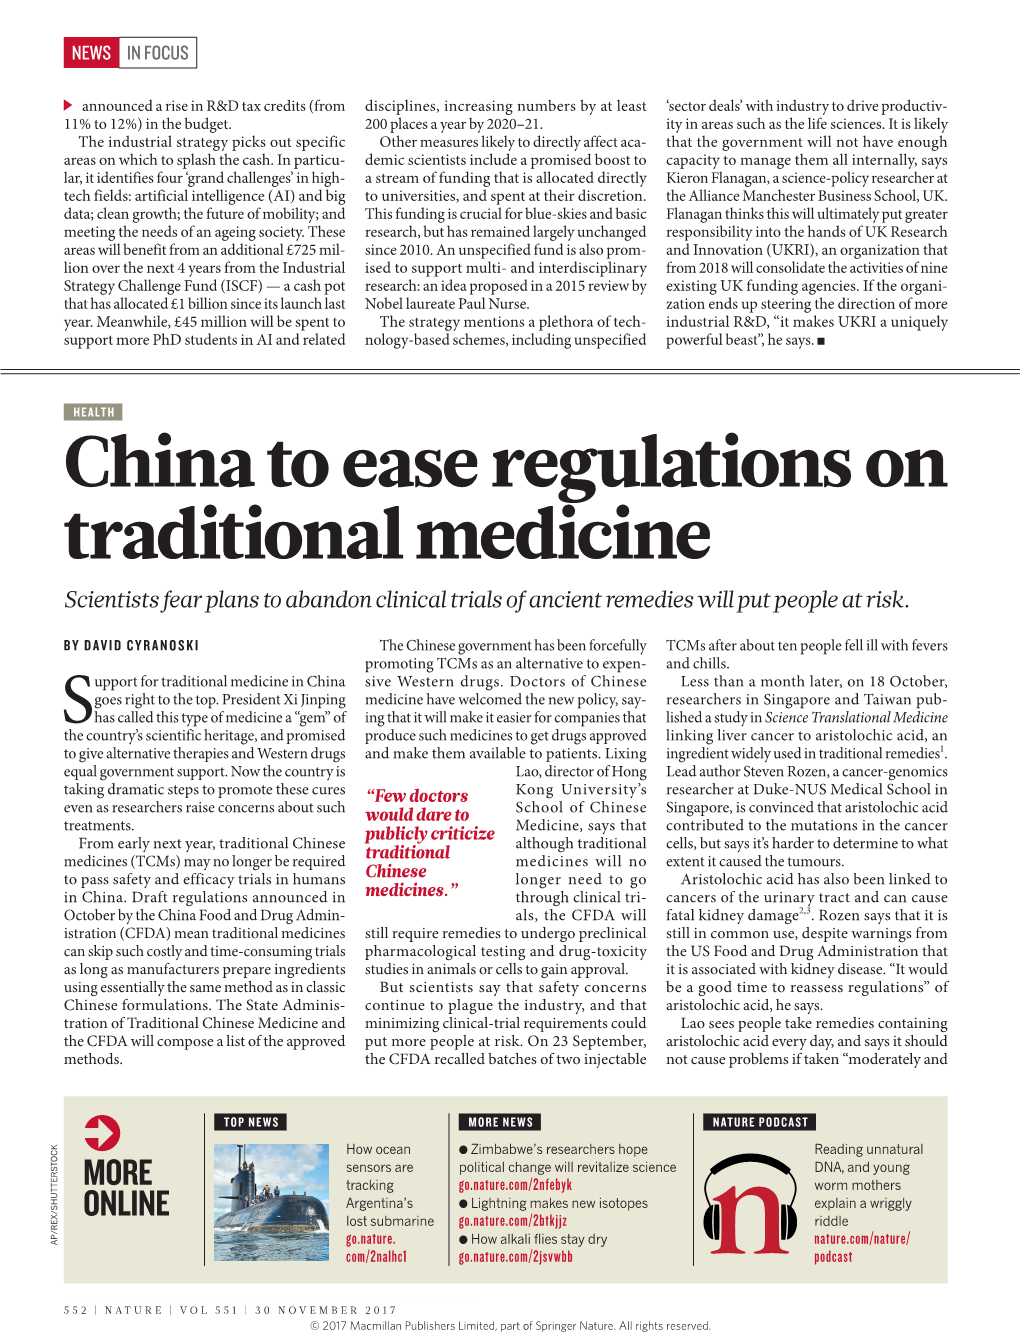 China to Ease Regulations on Traditional Medicine Scientists Fear Plans to Abandon Clinical Trials of Ancient Remedies Will Put People at Risk